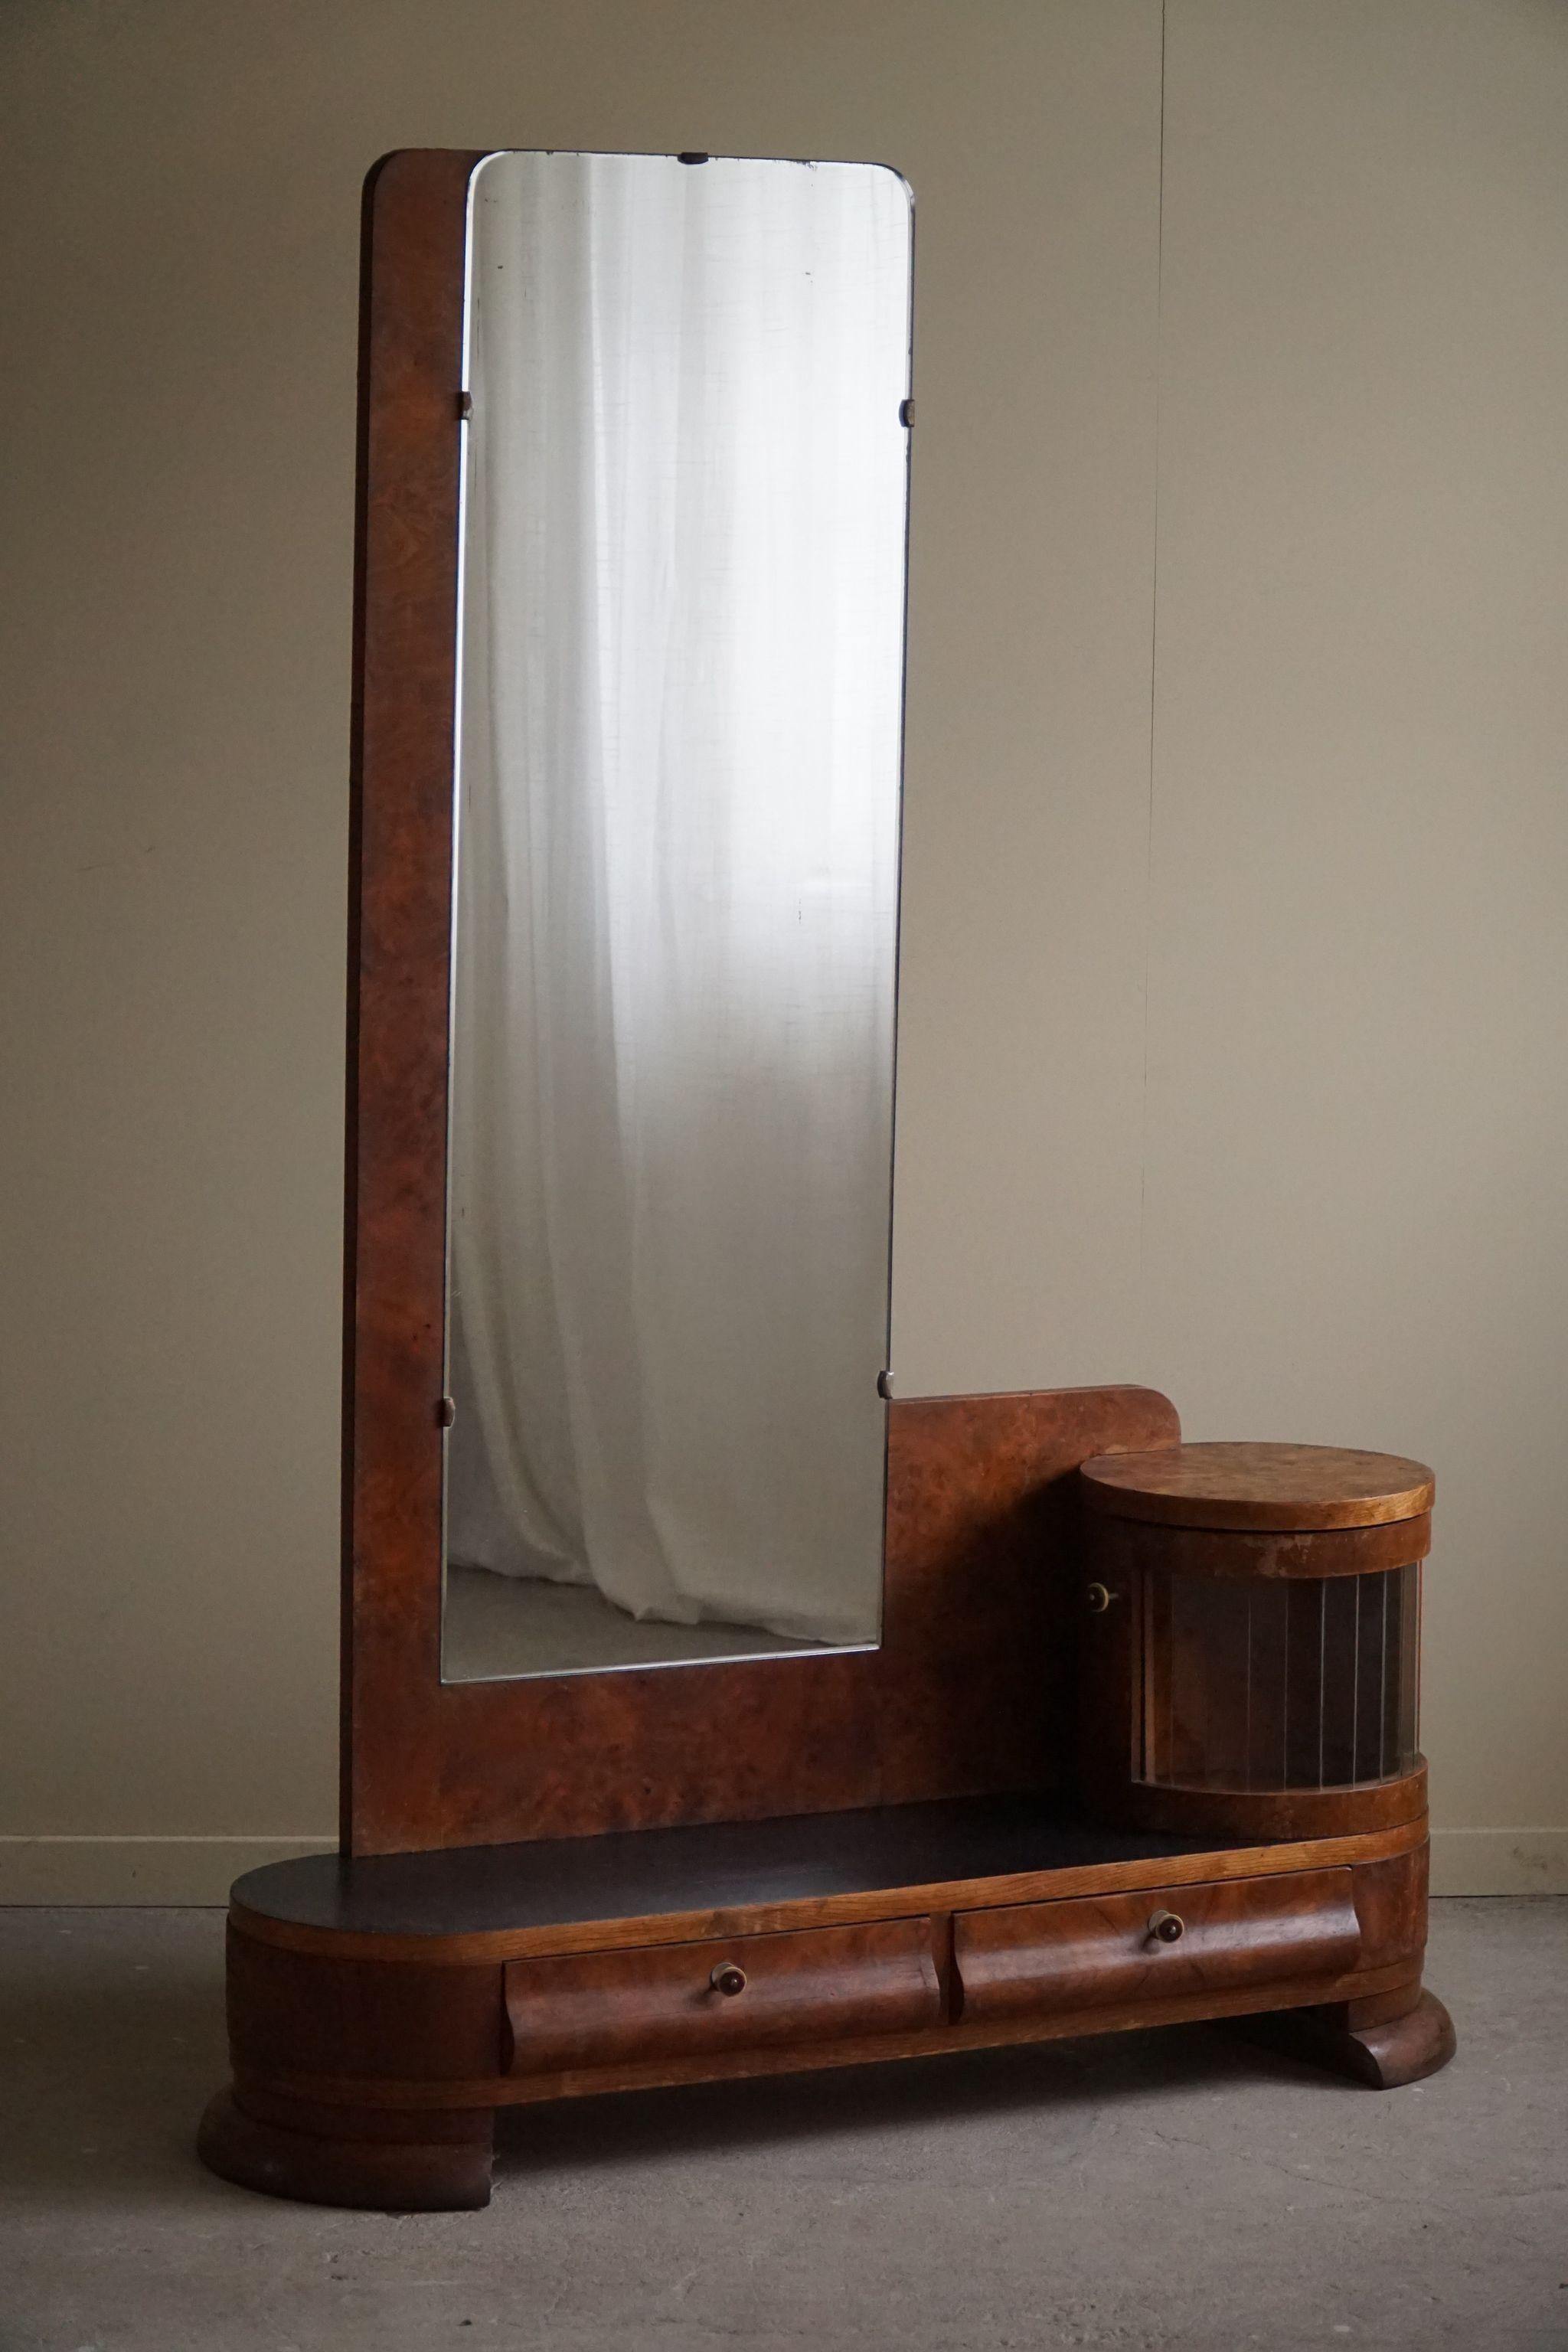 Danish Art Deco, Entry Console in Walnut with Mirror, Early 20th Century For Sale 2